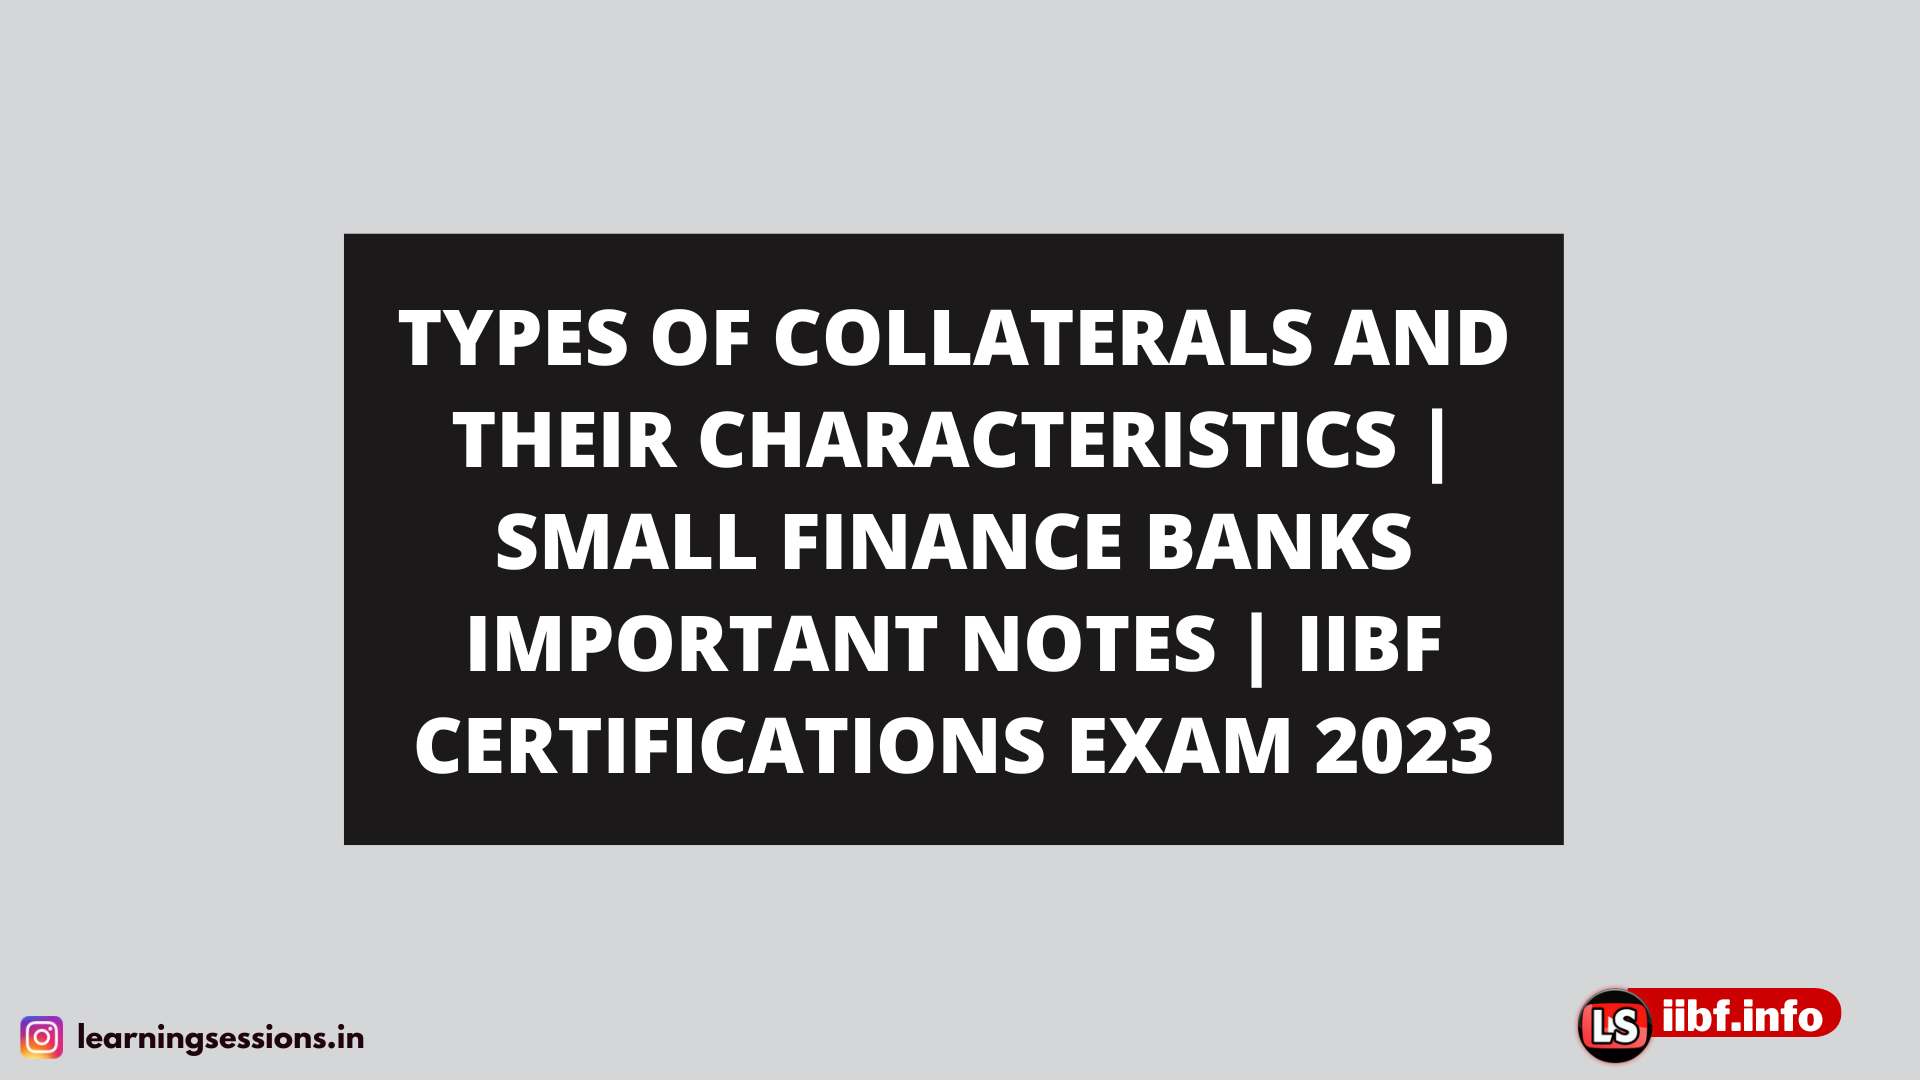 TYPES OF COLLATERALS AND THEIR CHARACTERISTICS | SMALL FINANCE BANKS IMPORTANT NOTES | IIBF CERTIFICATIONS EXAM 2023